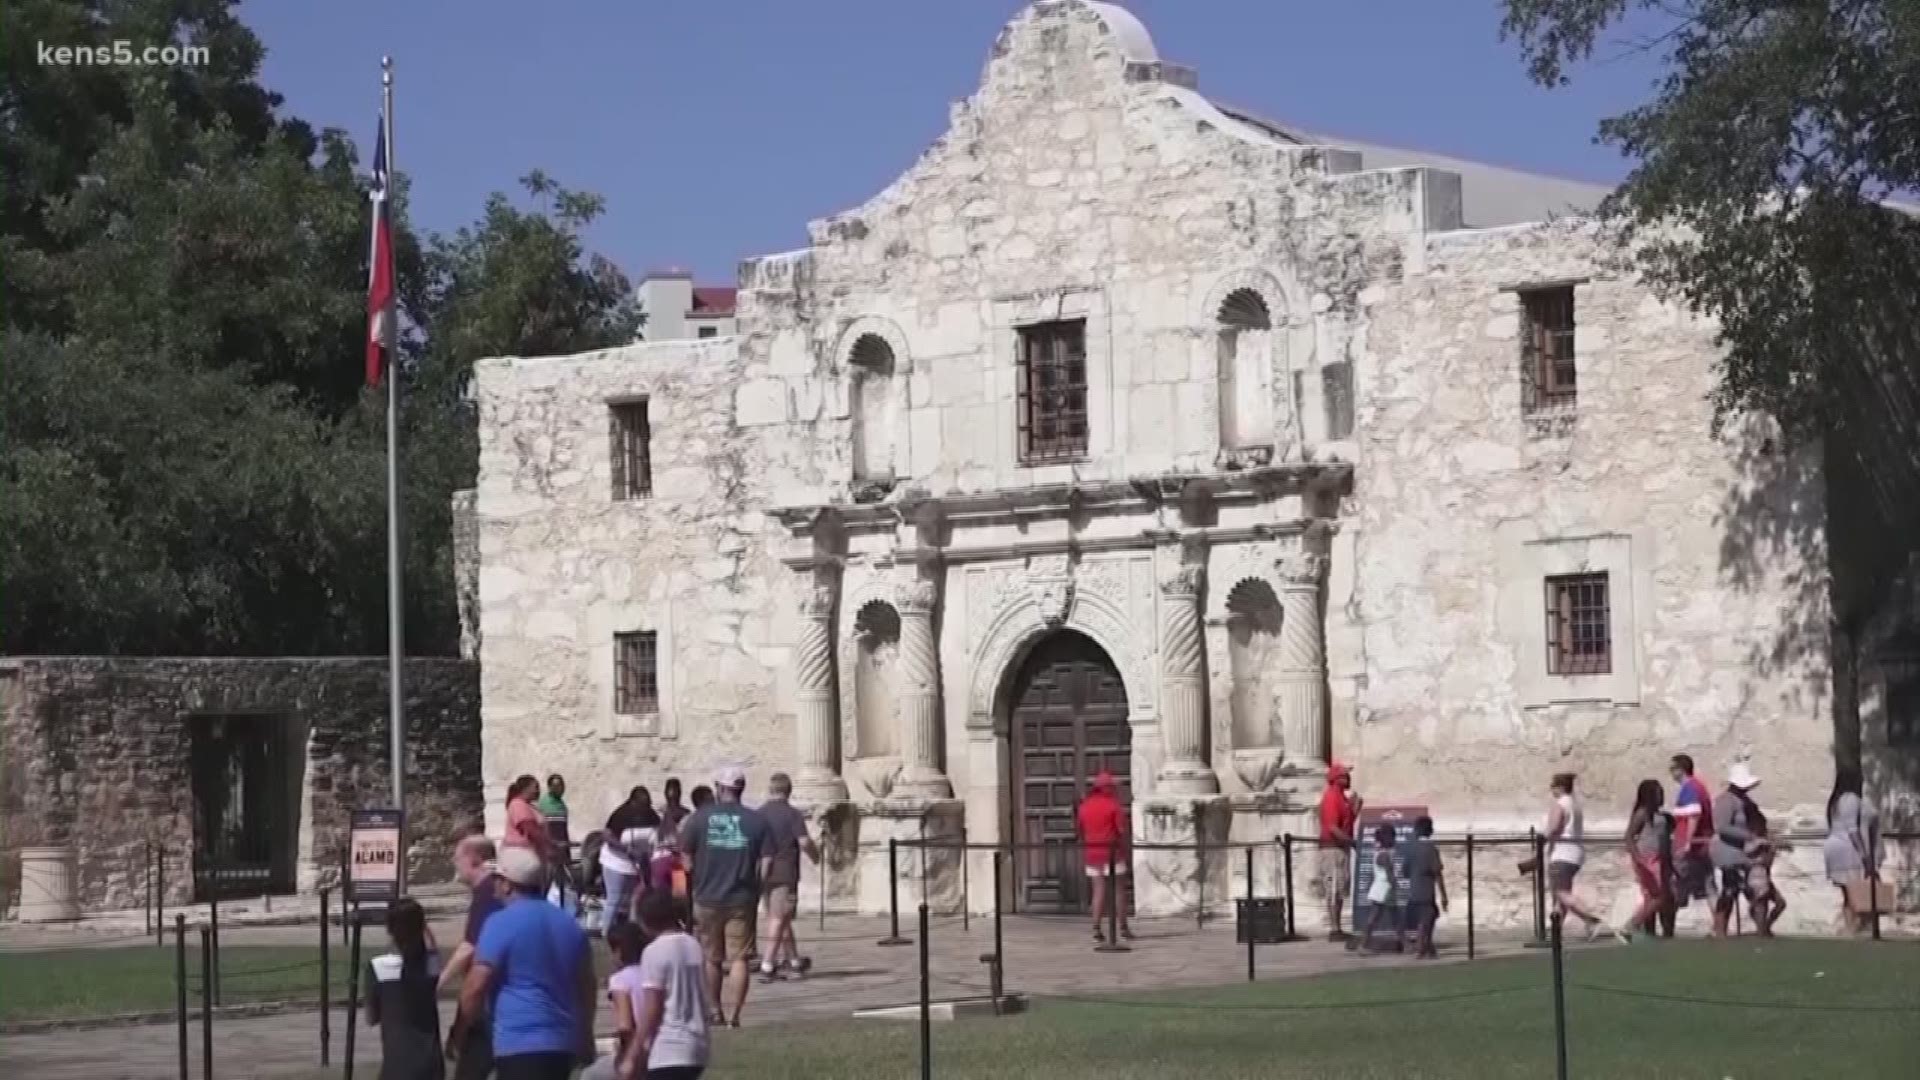 The vote to approve ends the planning process and moves the Alamo Master Plan a step closer to reality.